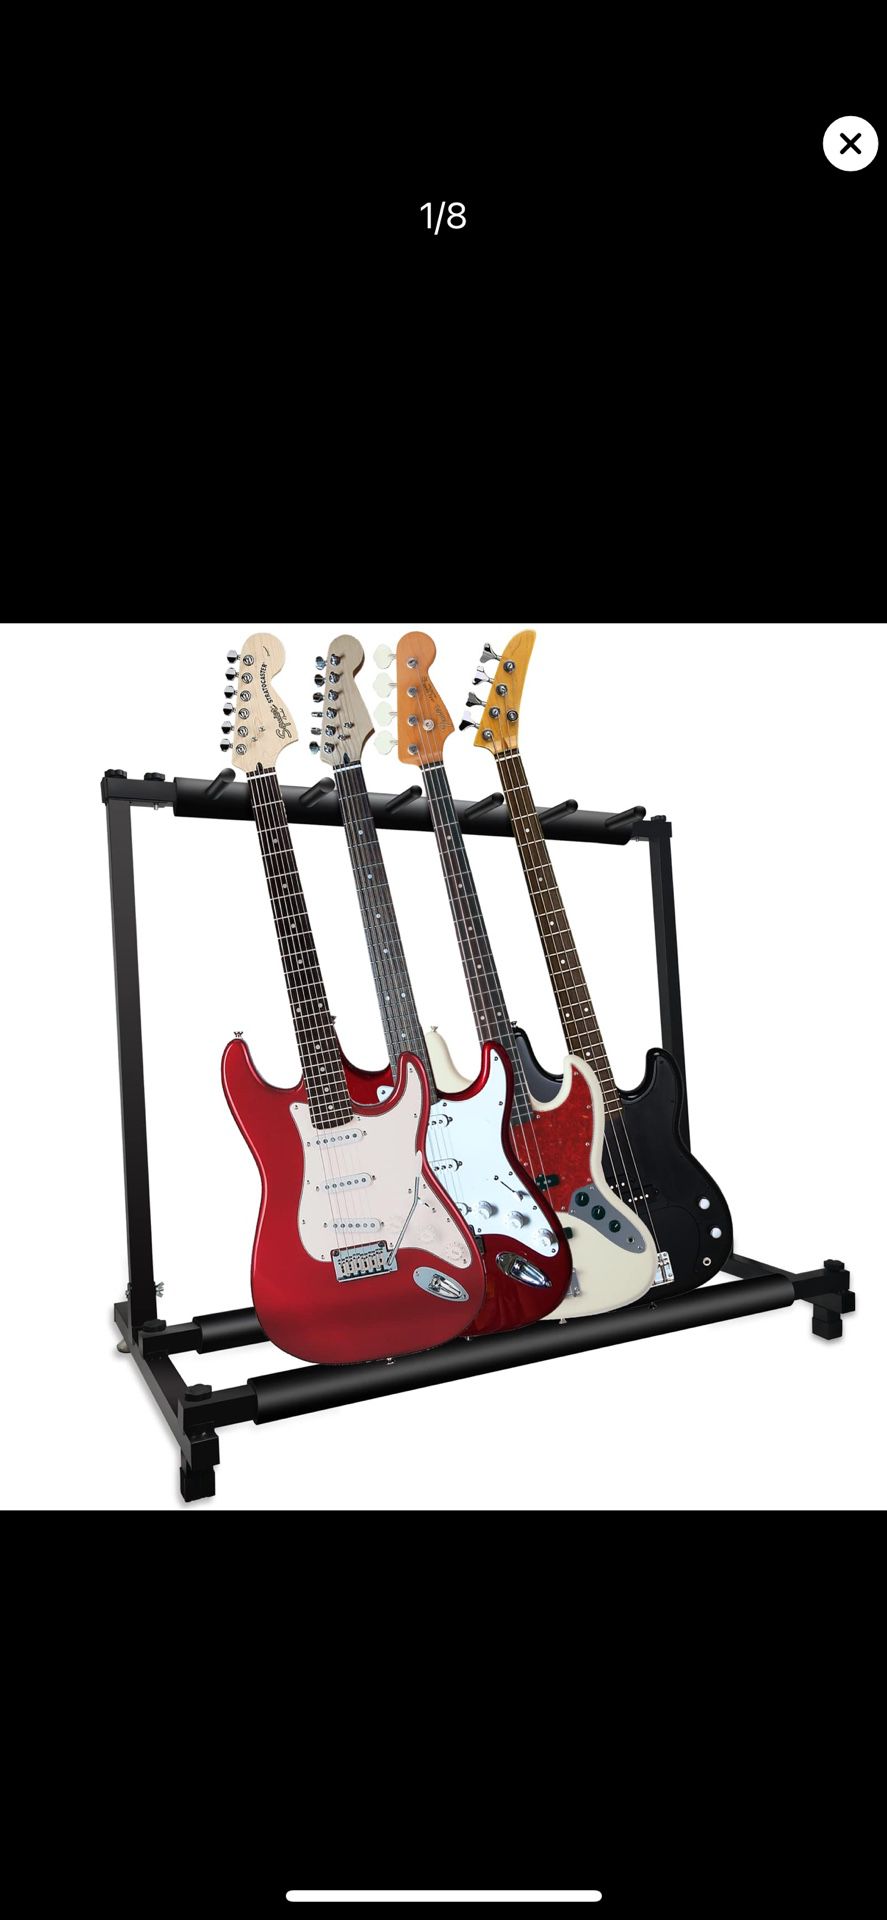 Rack For Guitars. Guitar Stand